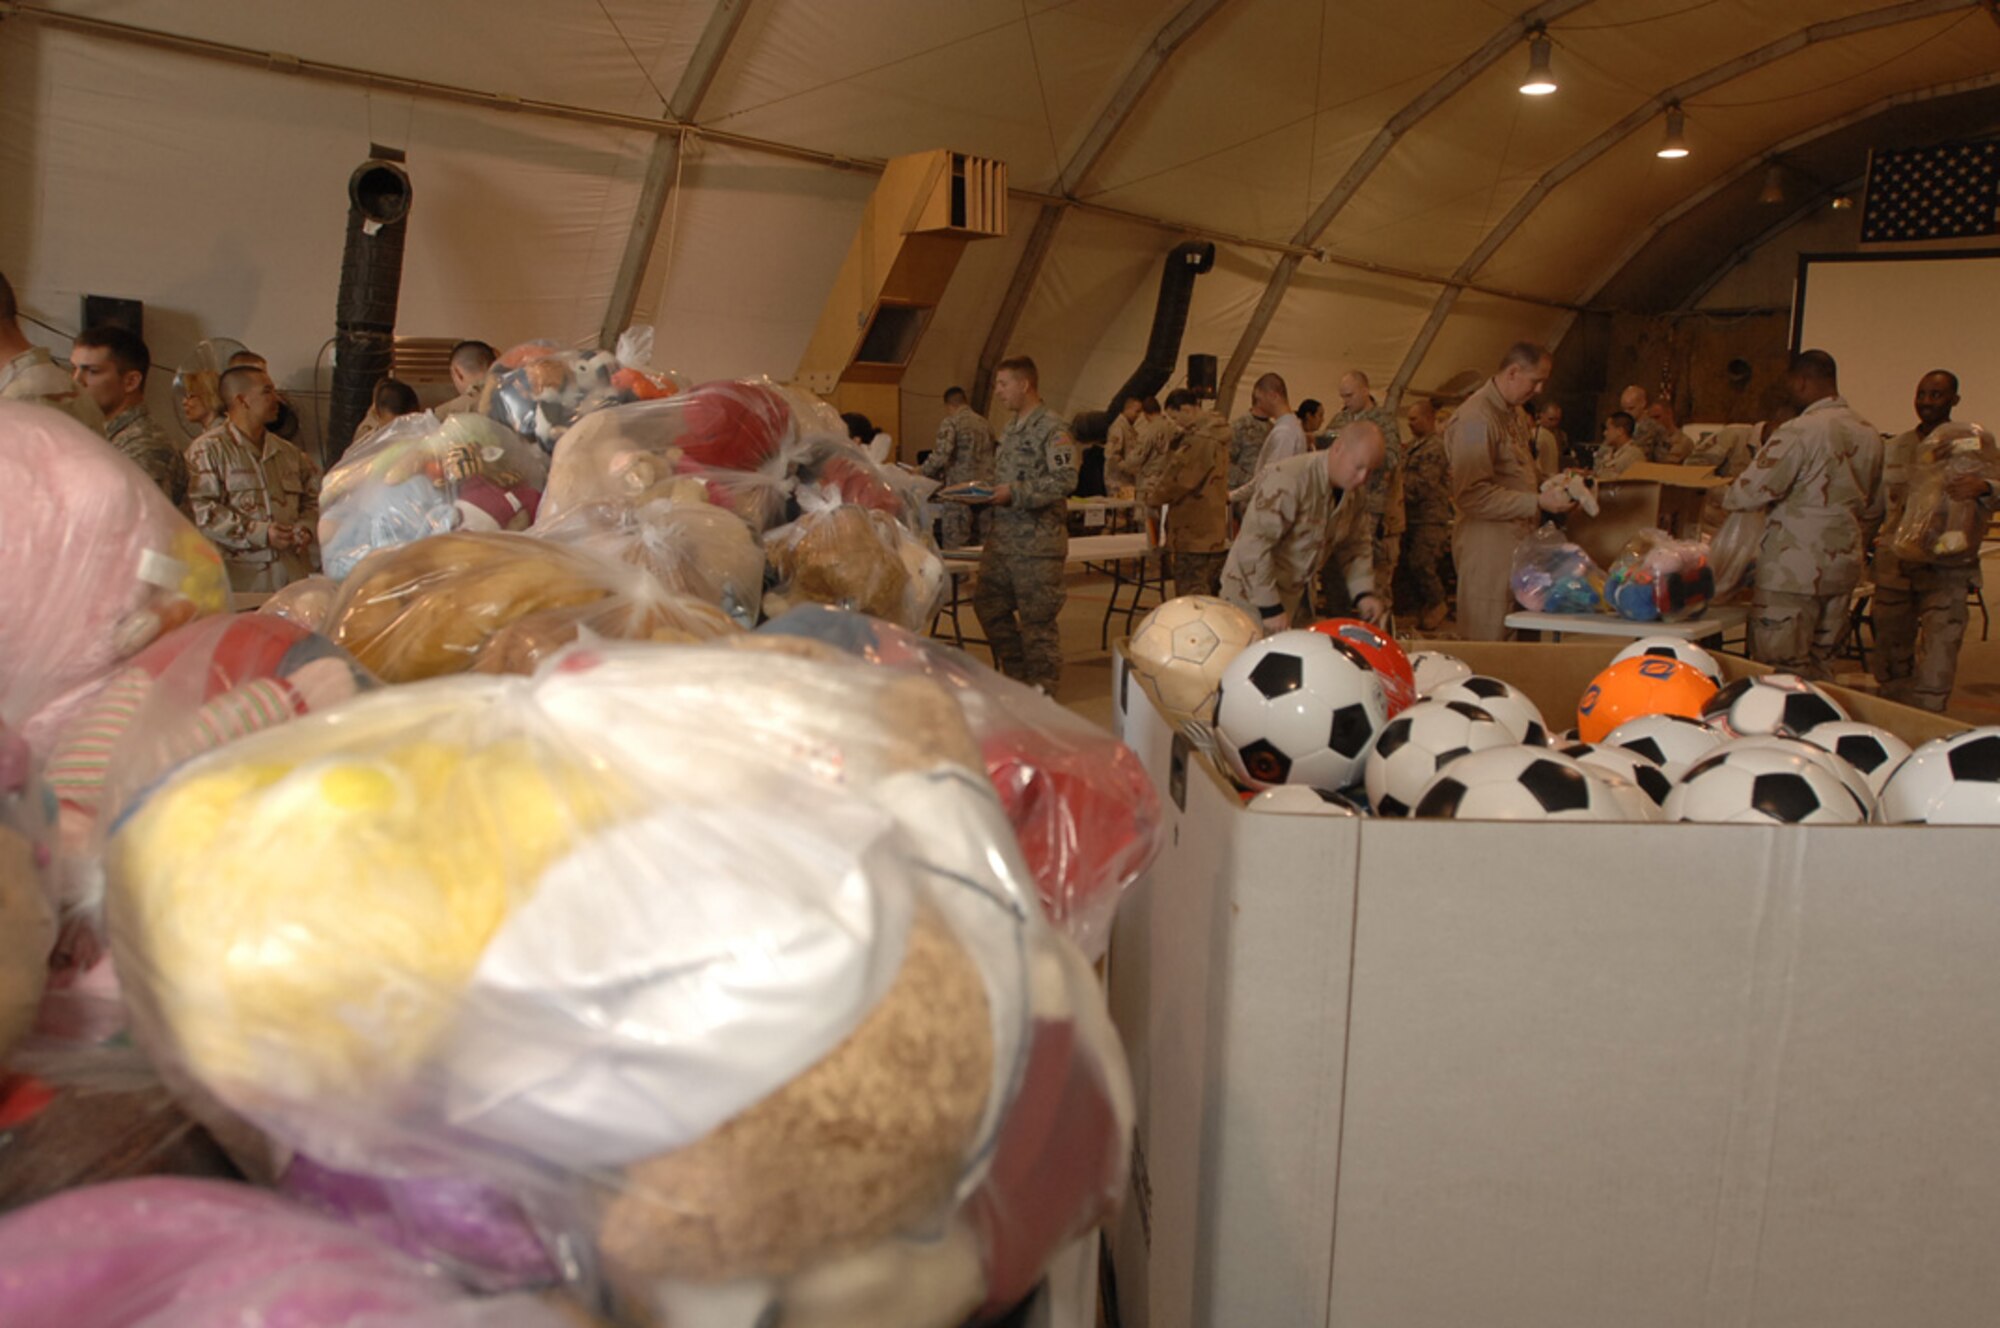 ALI AIR BASE, Iraq -- After only a few hours of sorting and organizing everything, Dec. 22, over four tons of supplies are ready to be given out in support of Operation Iraqi Child led by the Focus 5/6 and Top 3 councils. In just over a month, Airmen on base collected thousands of school supply items, soccer balls, stuffed animals and toys from back home. Airmen from across all eight squadrons spent a few hours sorting all the donated items which the office of special investigations will give to Iraqi families in the An Nasiriyah area villages. (U.S. Air Force photo/Airman 1st Class Jonathan Snyder)